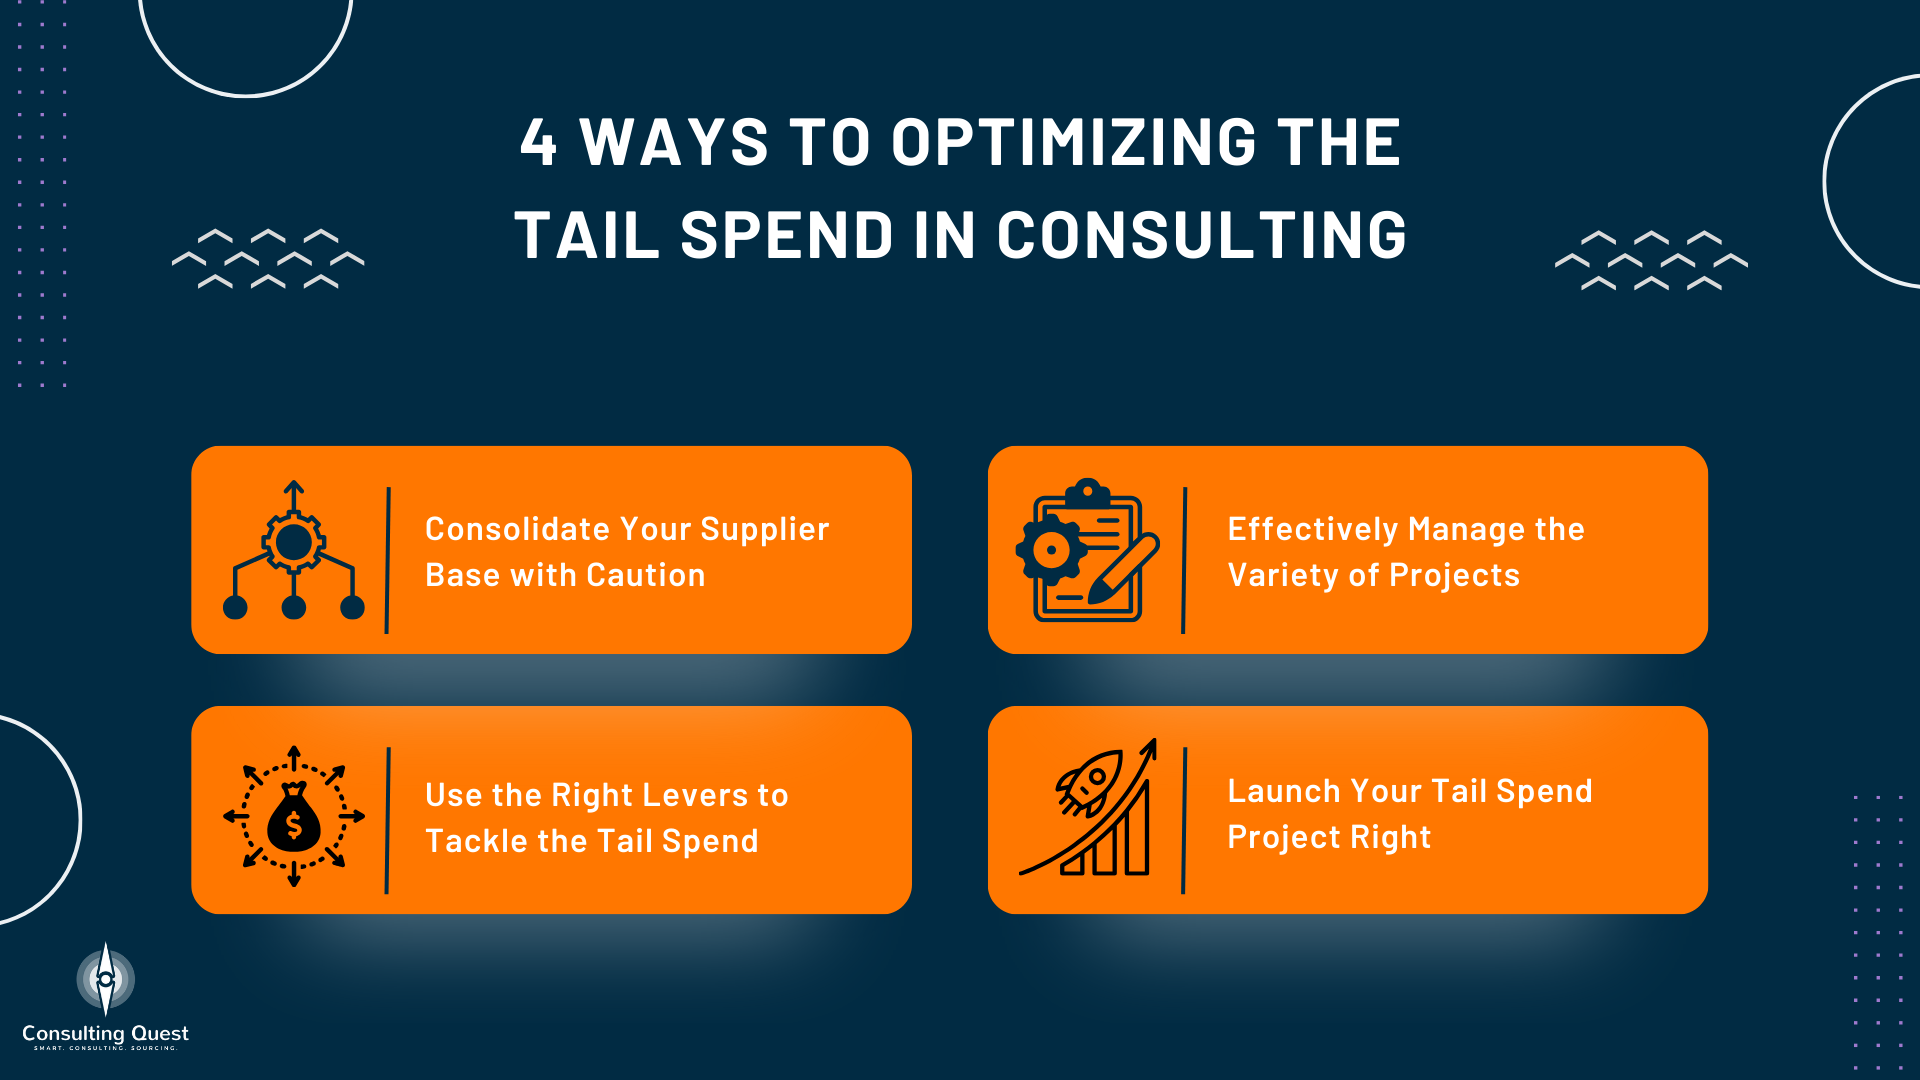 4 ways to optimizing the tail spend in consulting